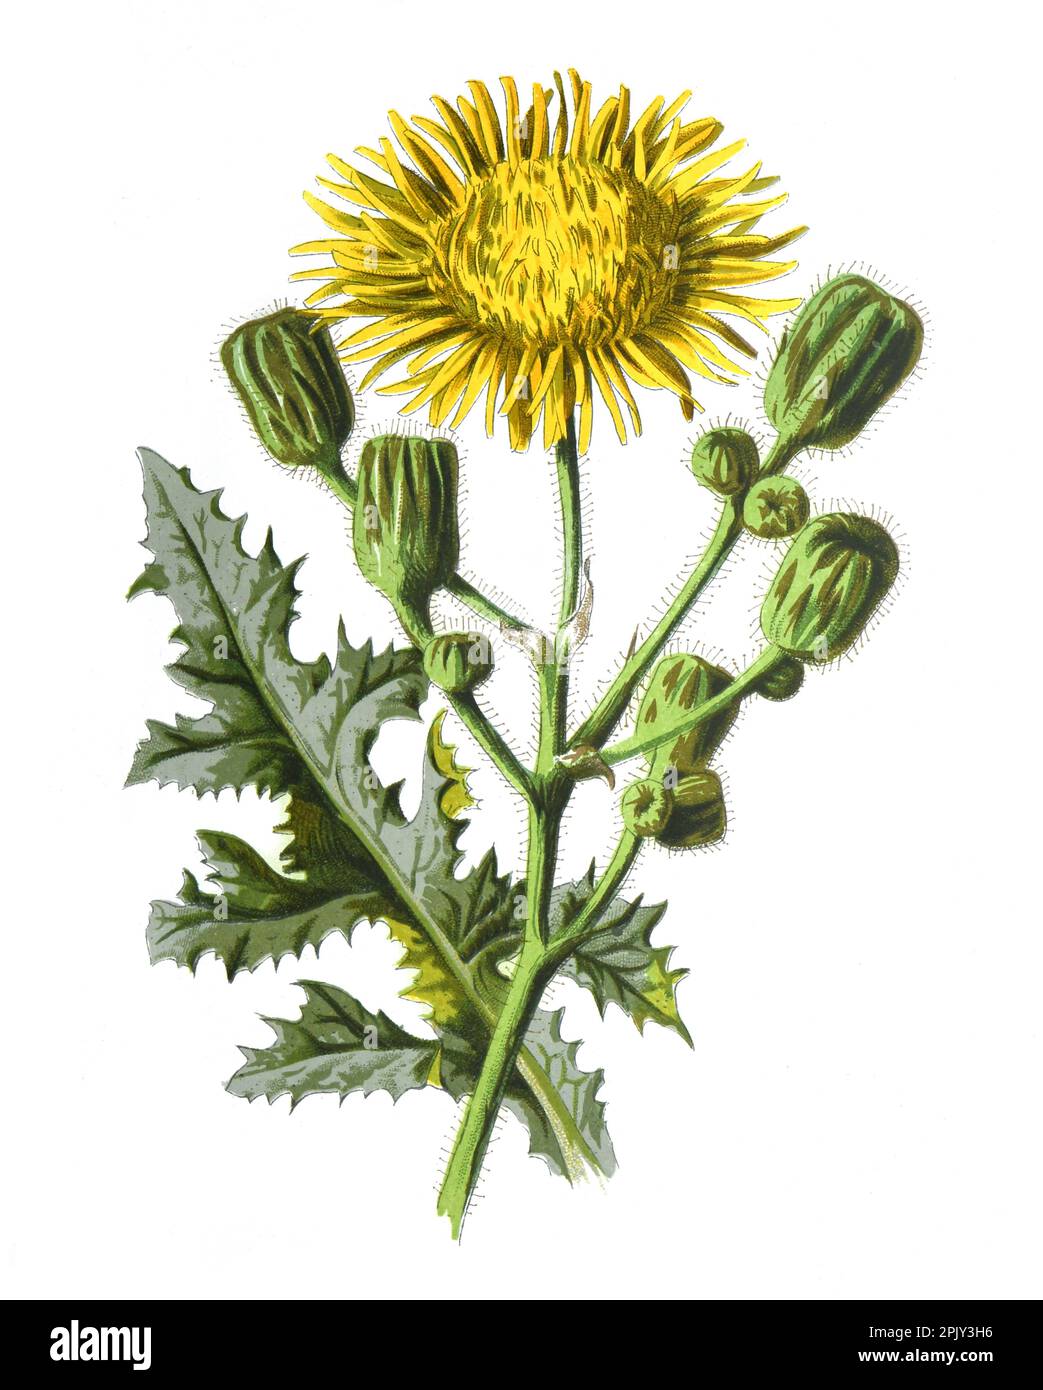 Corn sowthistle flower or Sonchus arvensis Asteraceae plant hand drawn field flowers illustration.Vintage and antique flowers. wild field flower. Stock Photo